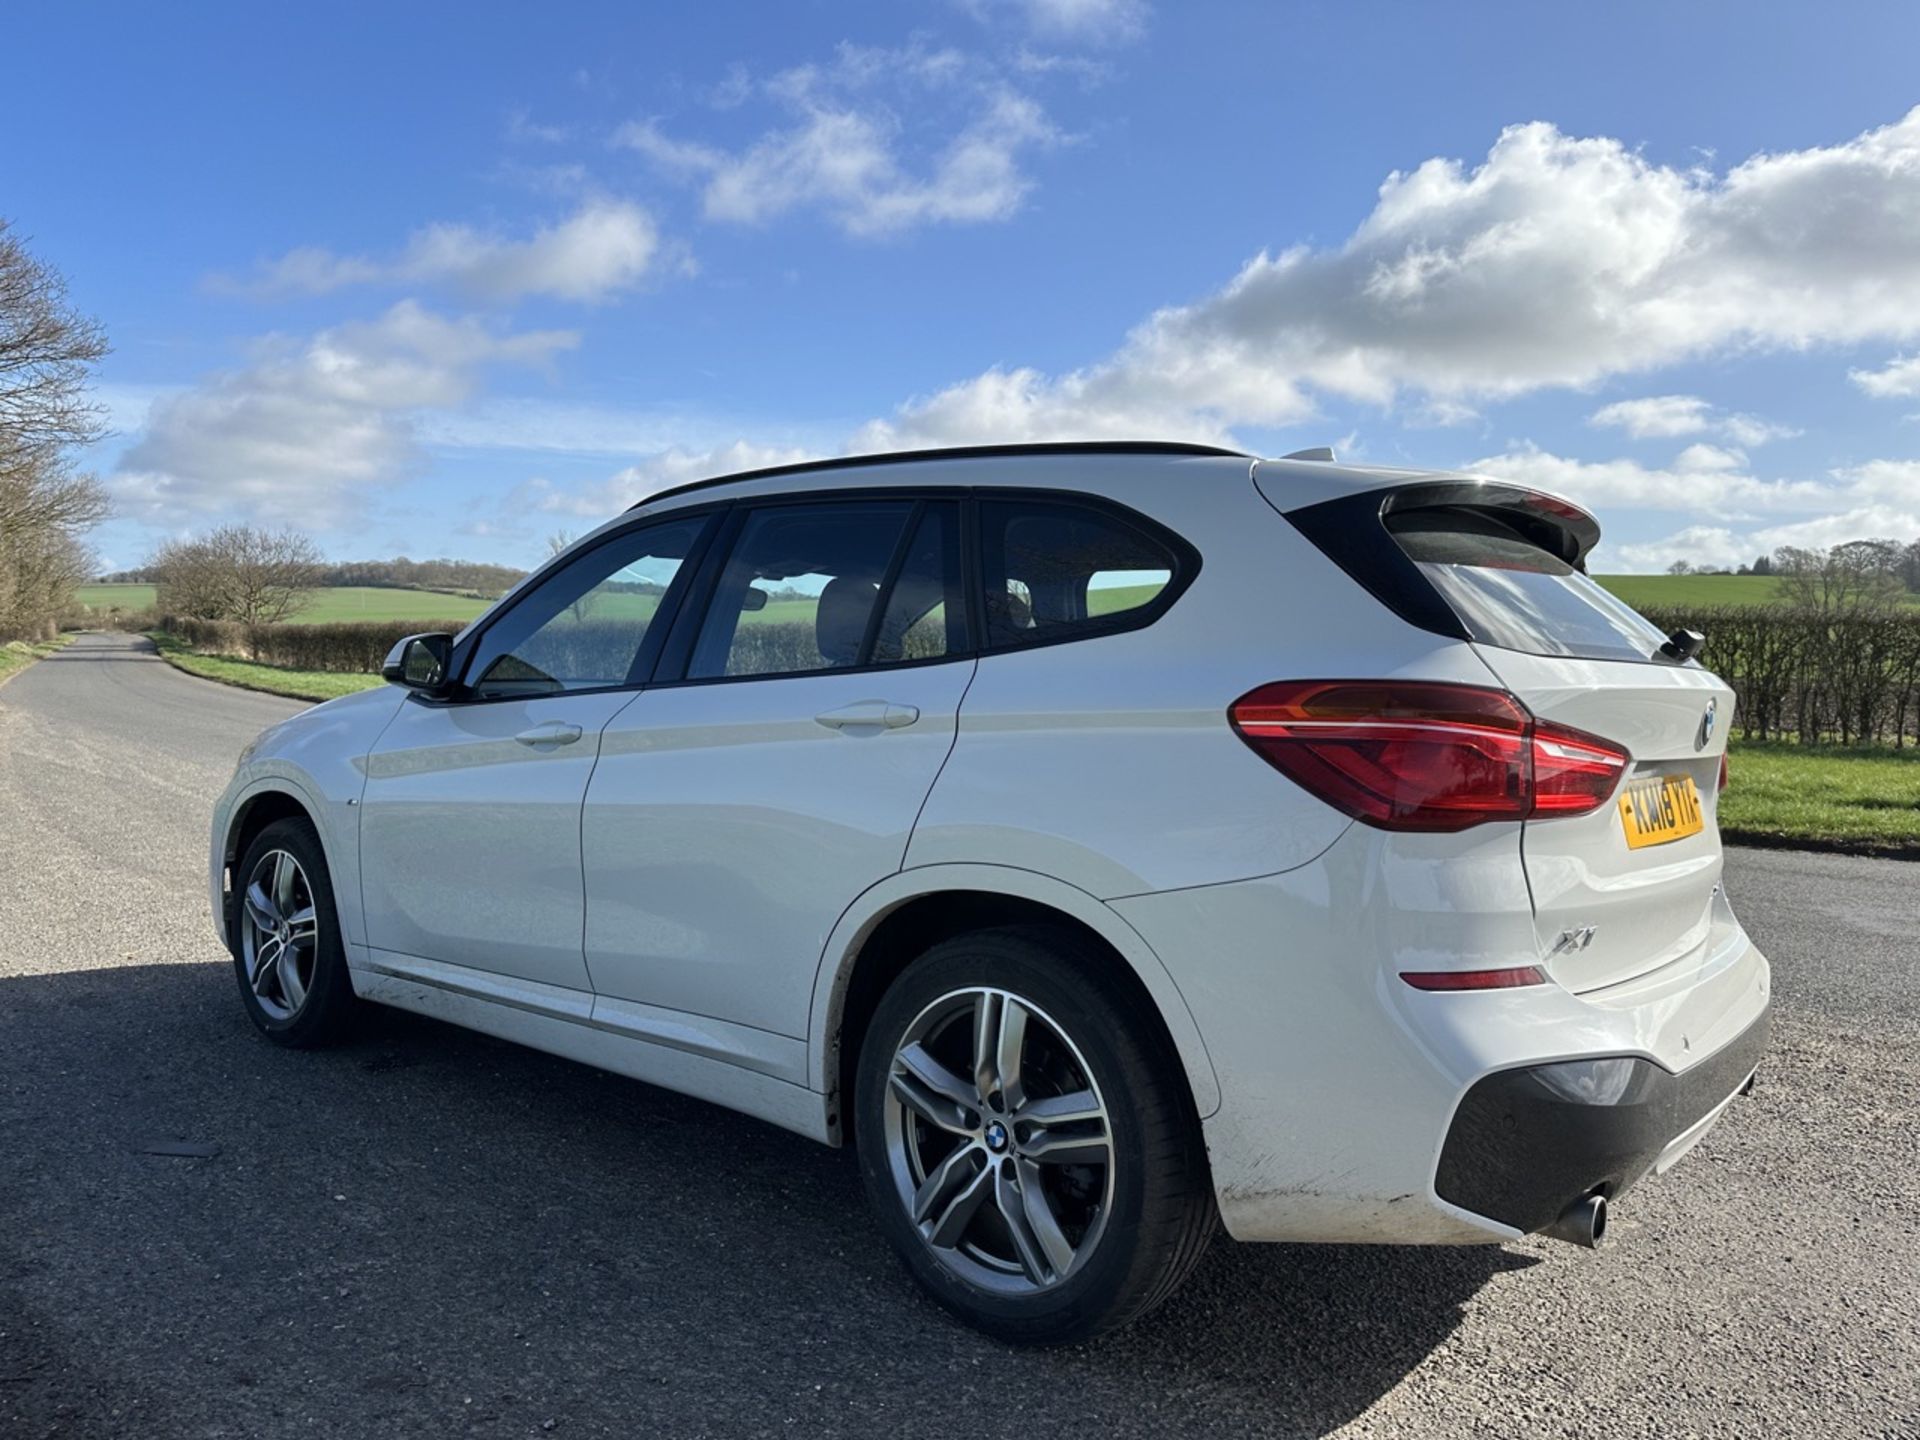 BMW X1 Xdrive20i M Sport Auto 20i - 2018 - 16.5k MILES ONLY - M SPORT Seats/badging - Image 9 of 22